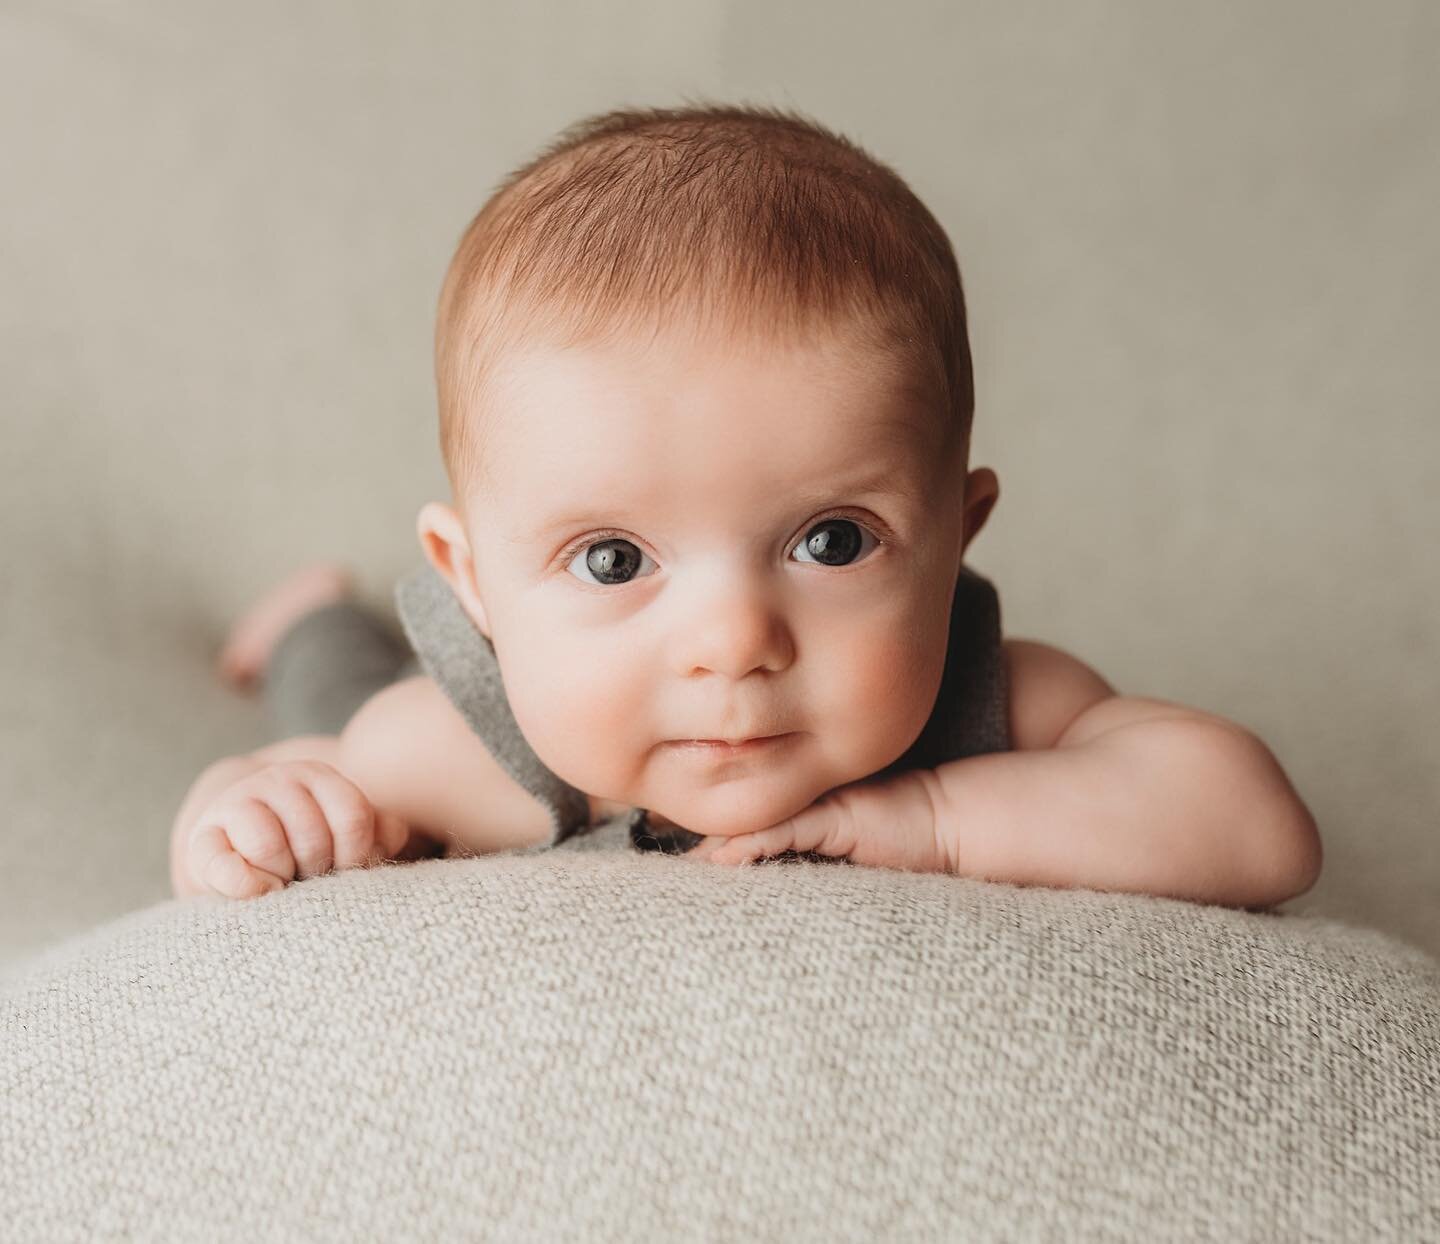 Happy Friday!!!! This three month old cutie rocked his milestone session!